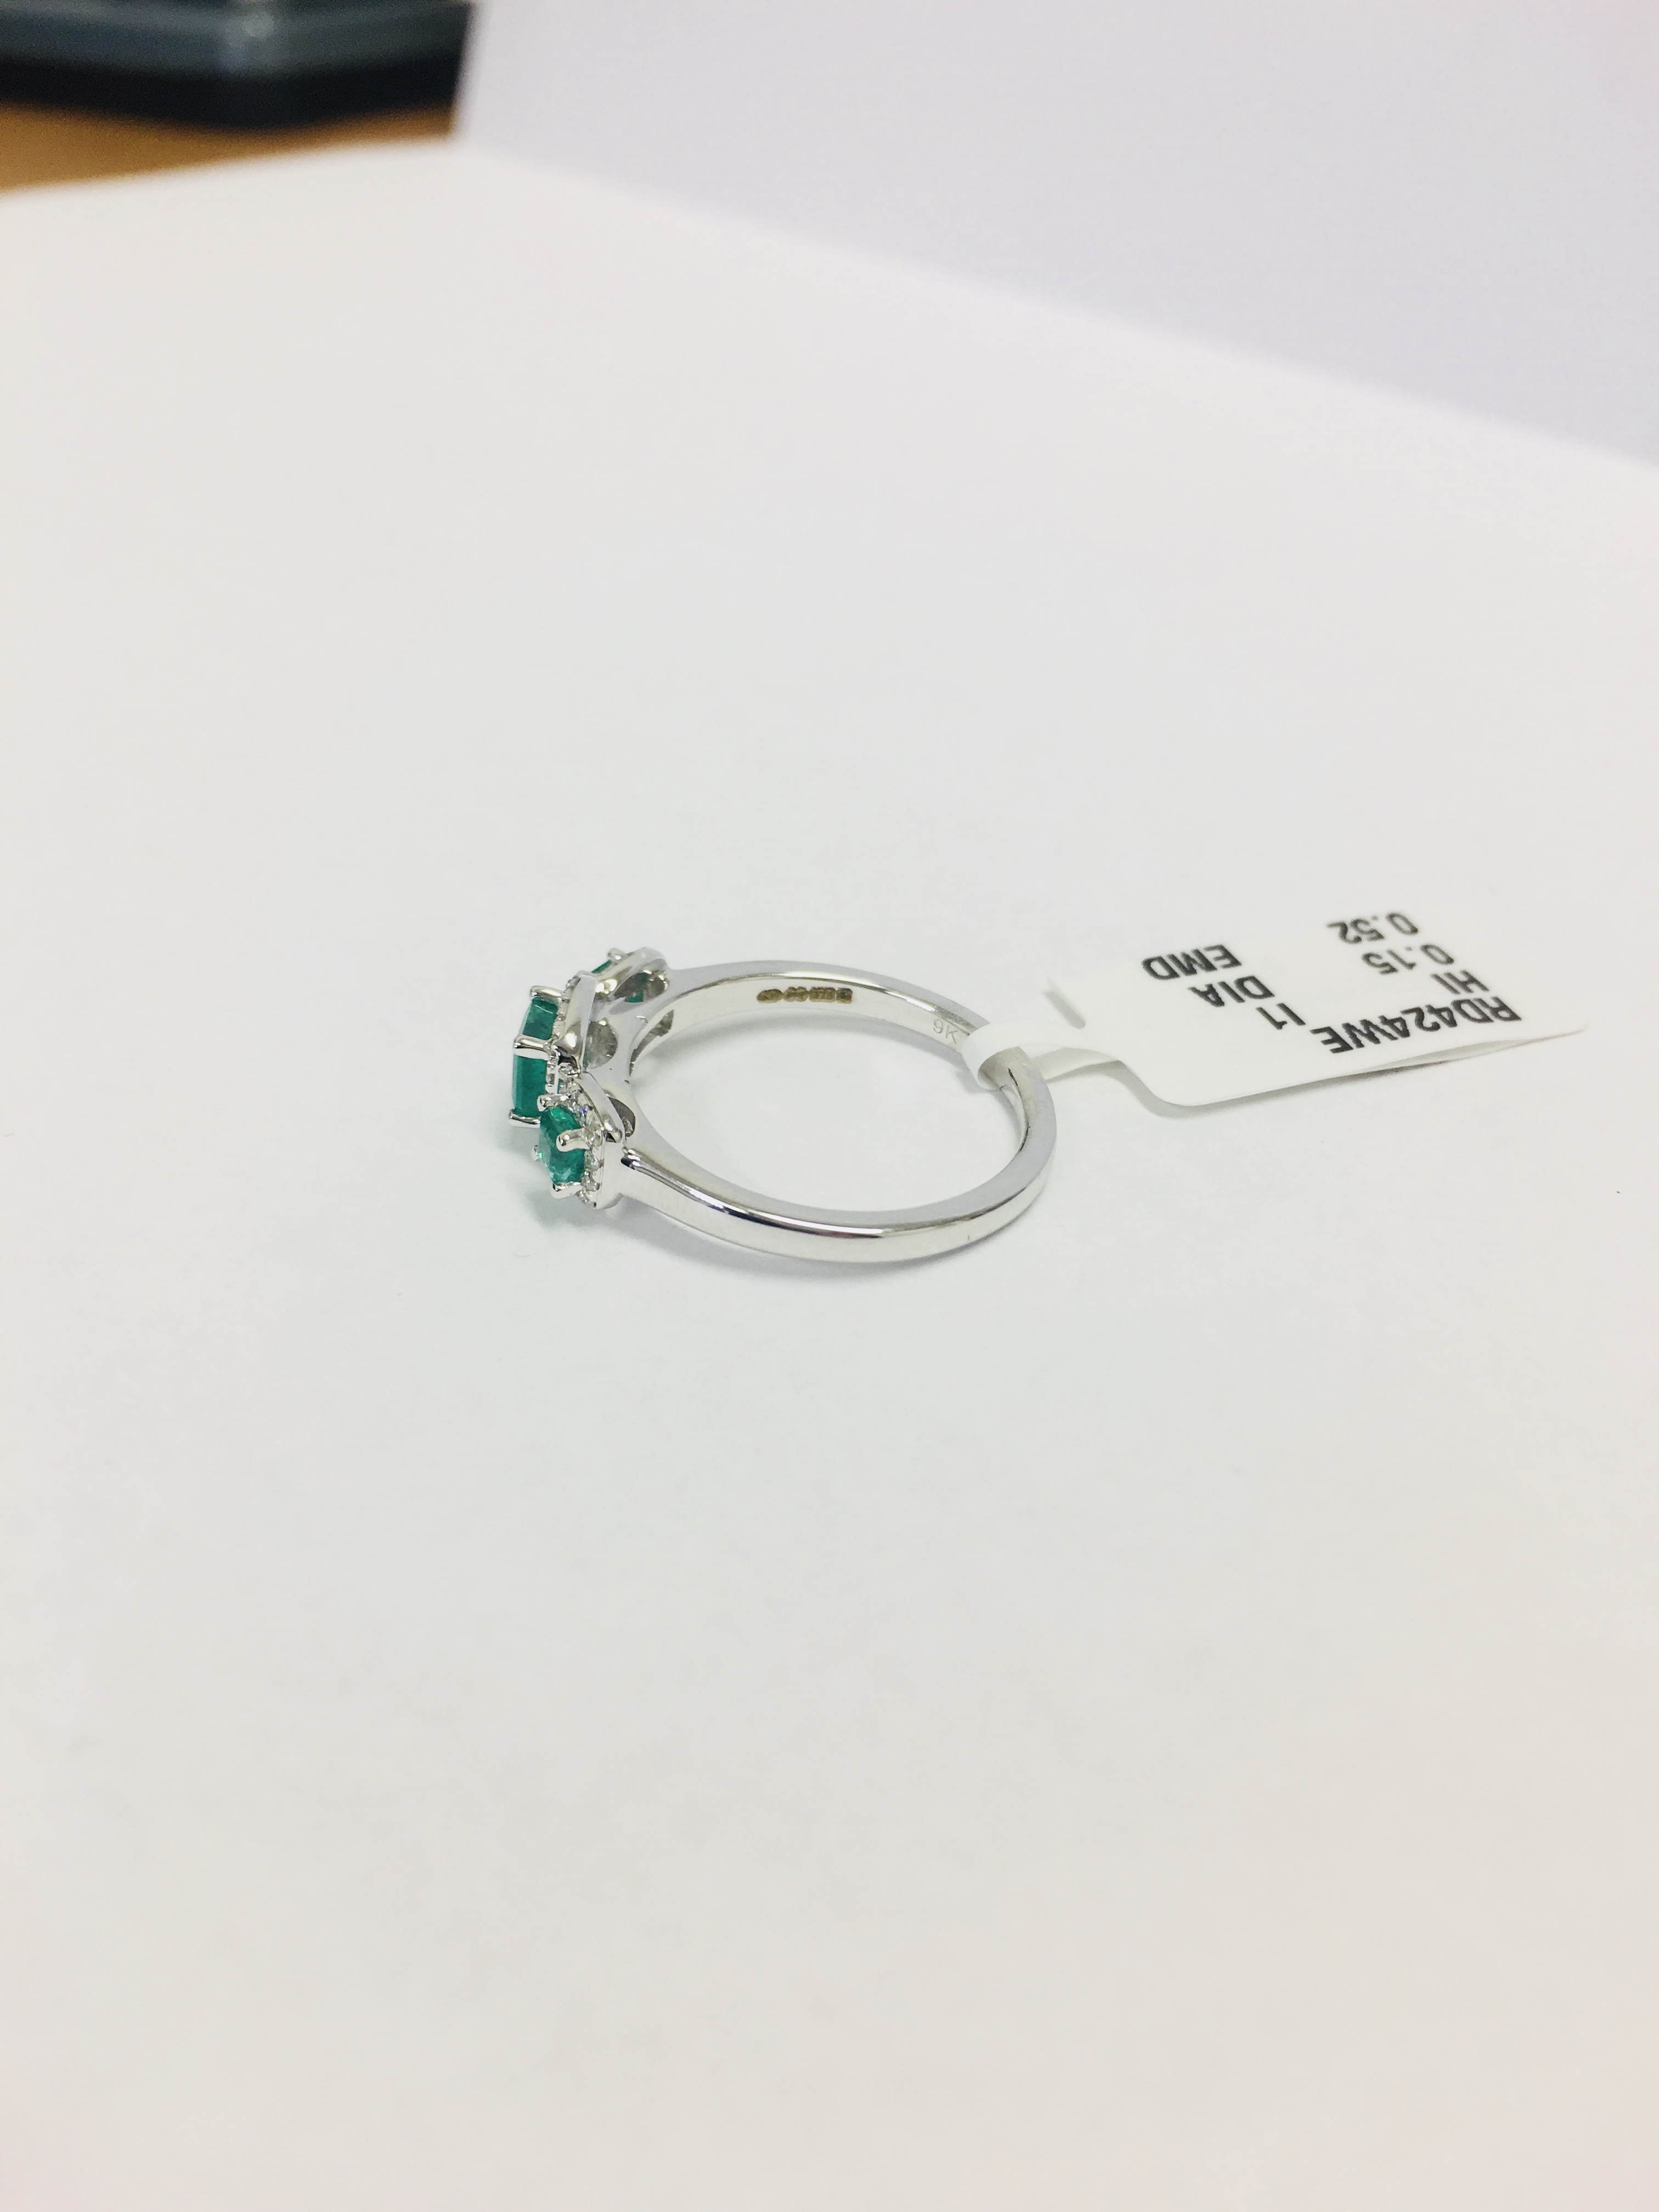 9Ct White Gold Diamond Emerald Cluster Ring, - Image 3 of 6